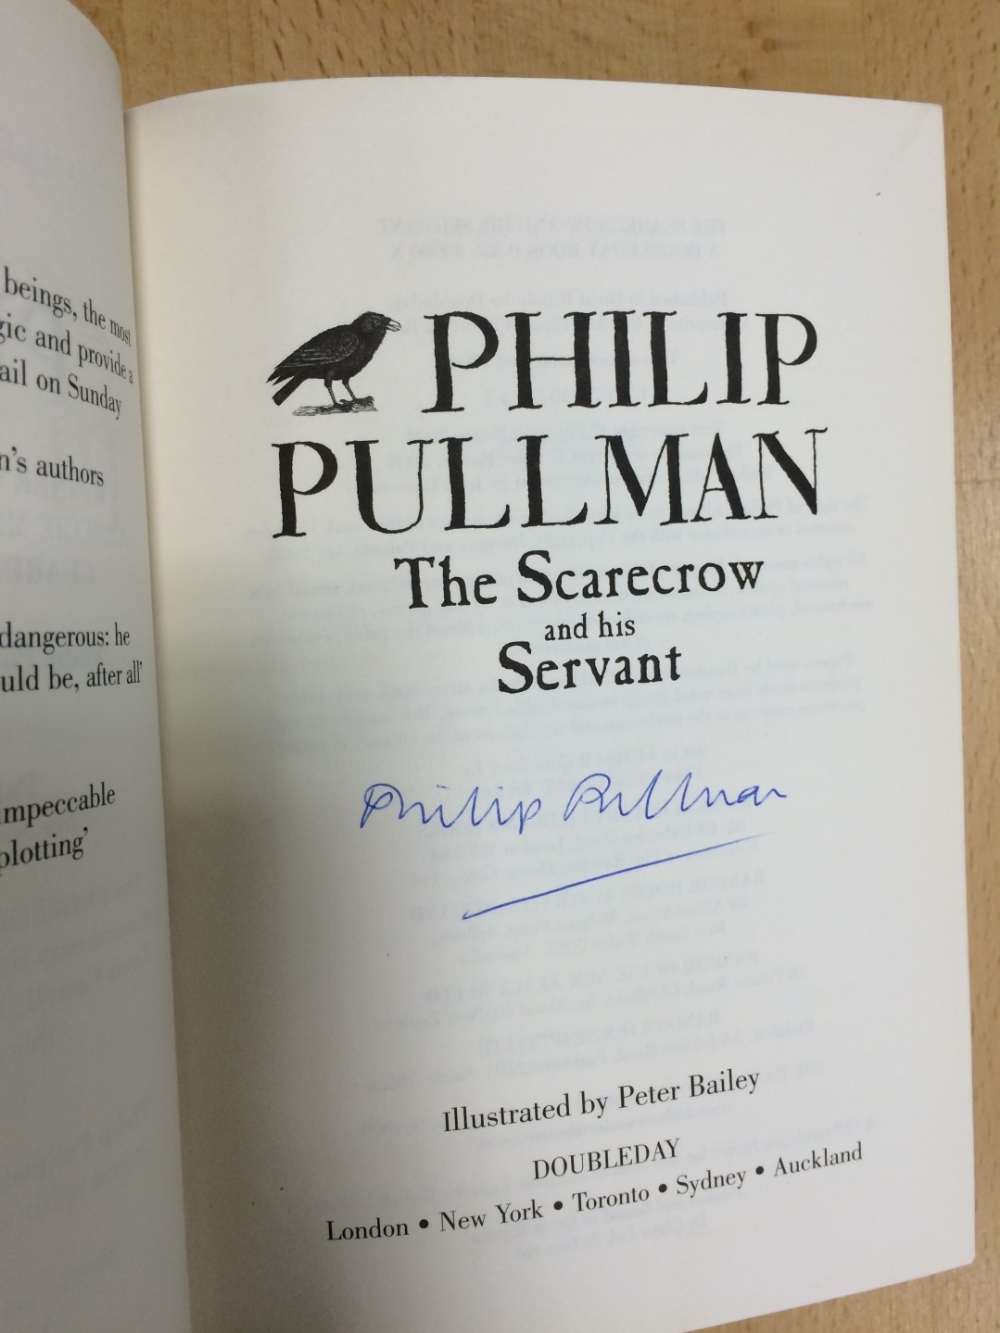 PULLMAN (Philip) The Golden Compass, first edition Knopf 1996, signed by the author to a label to - Image 4 of 5